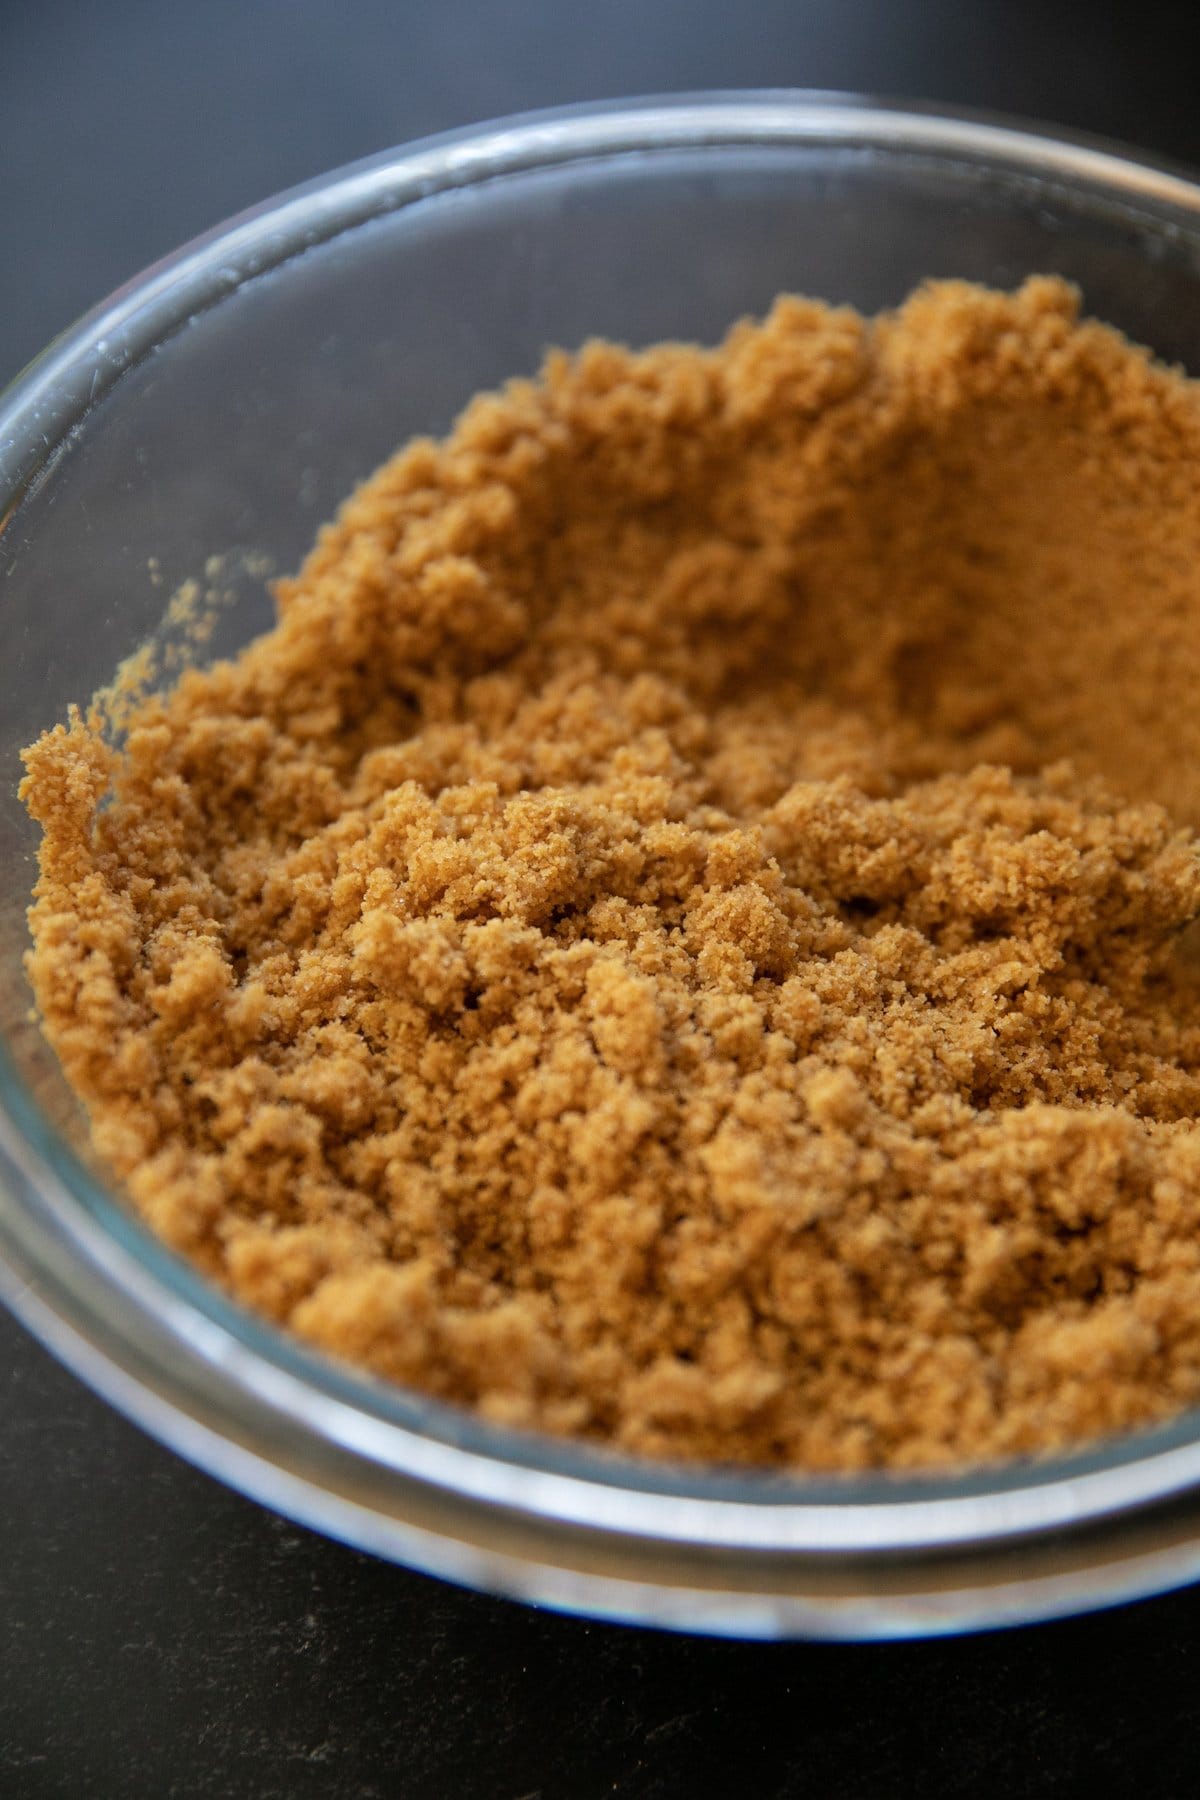 graham cracker crumbs mixed with butter and sugar in a glass bowl